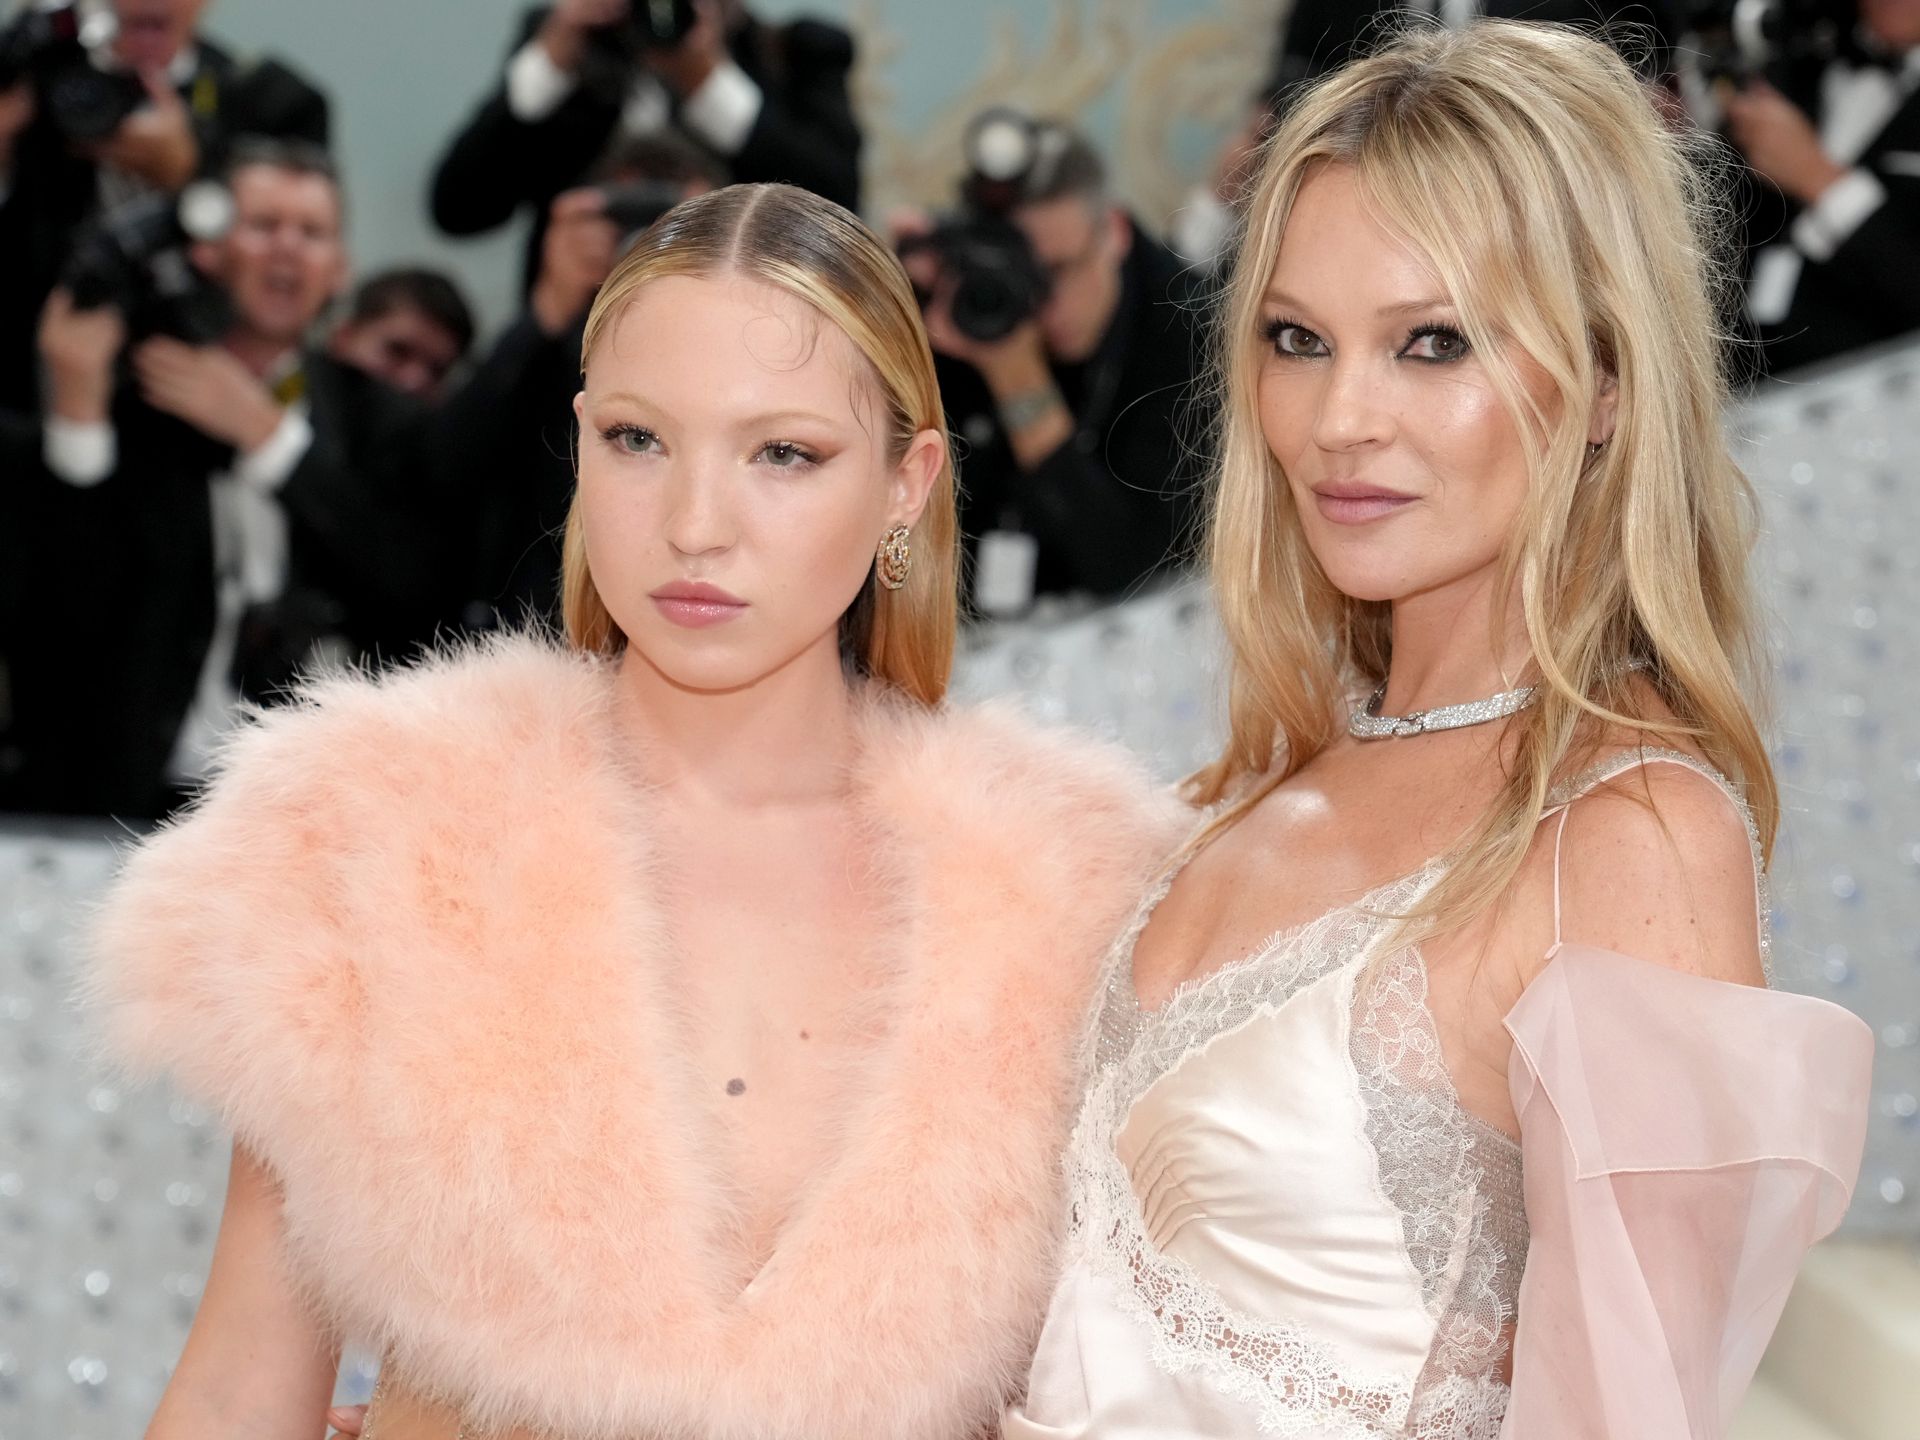 Lila Moss Honors Mom Kate Moss With Sheer Dress at the Fashion